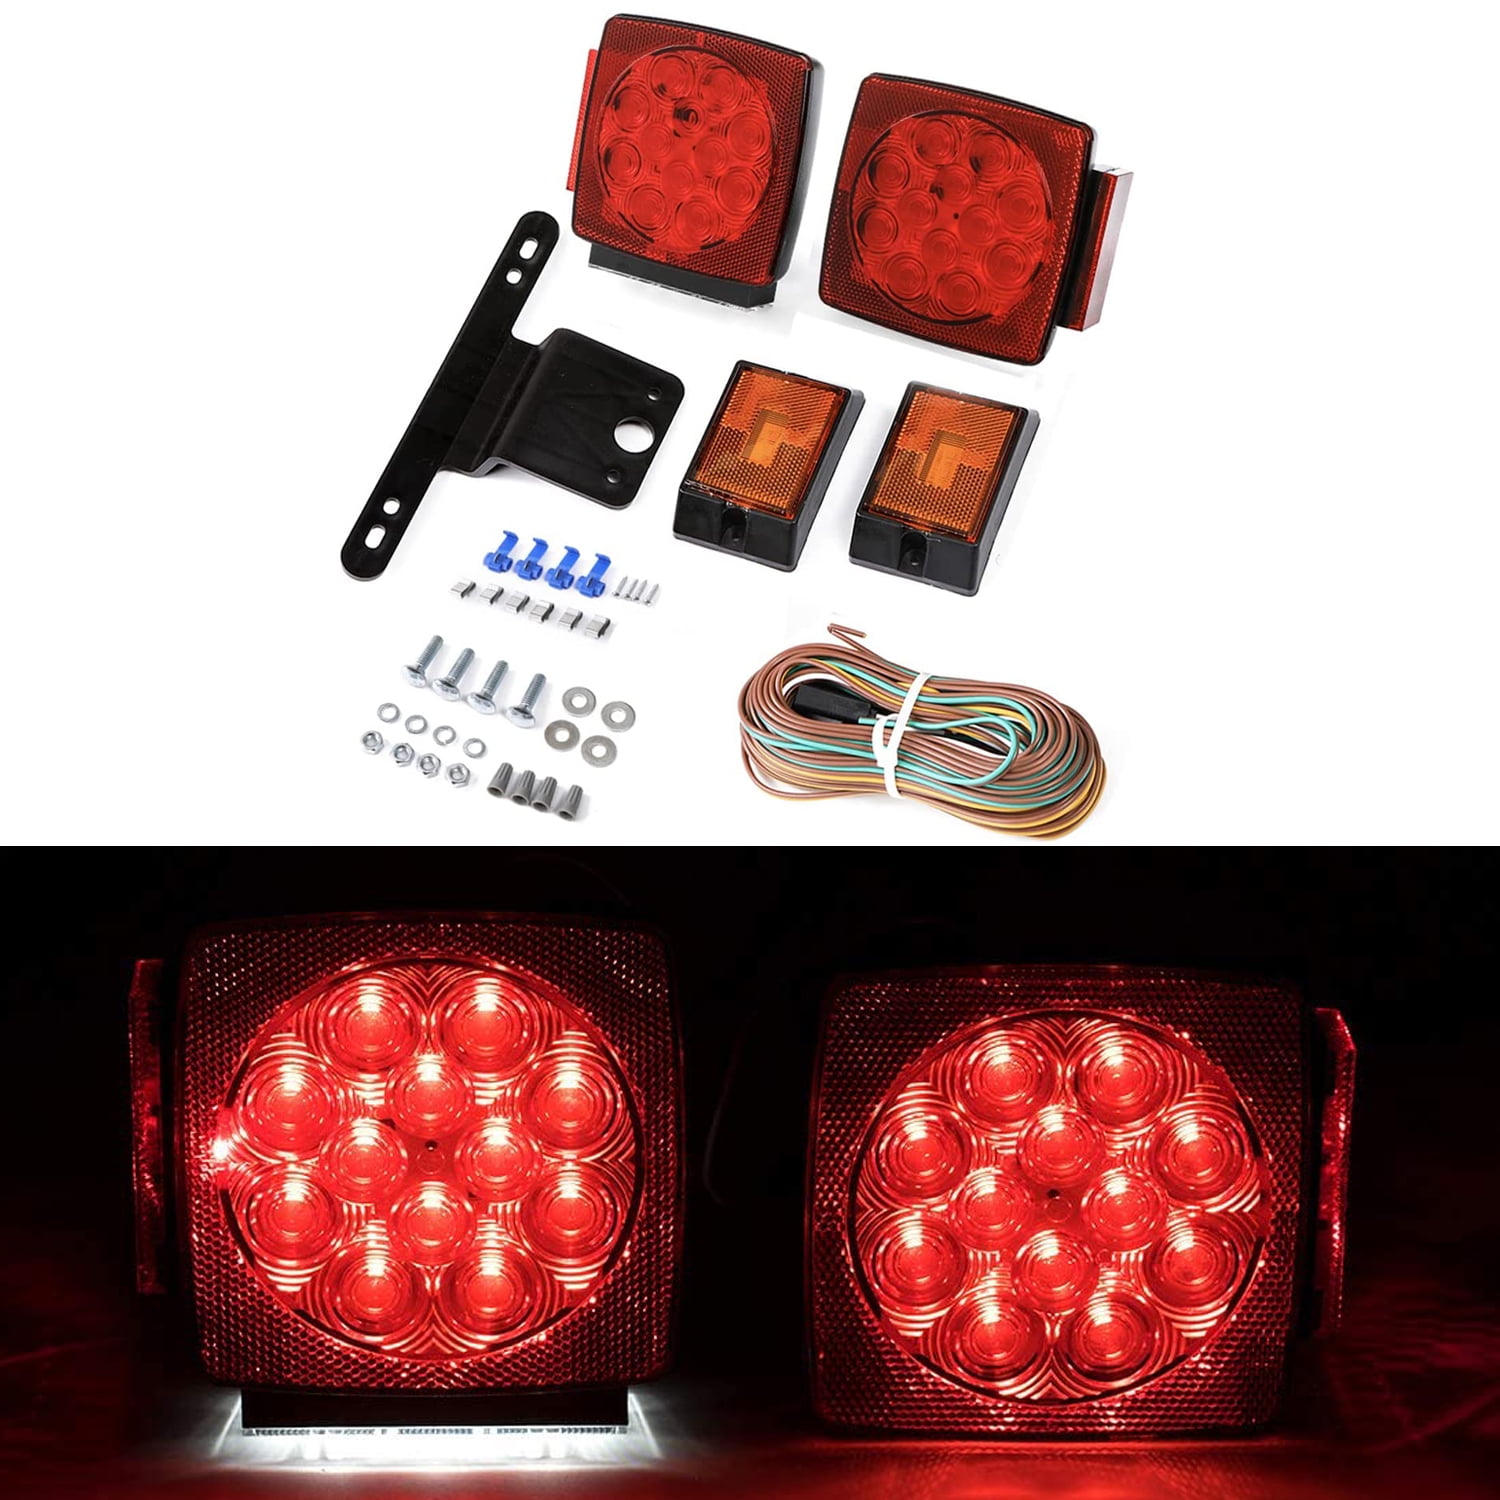 Exclusive Trailer Light kit CZC AUTO 12V LED Submersible Trailer Tail Light Kit for Under 80 Inch Boat Trailer RV Marine 